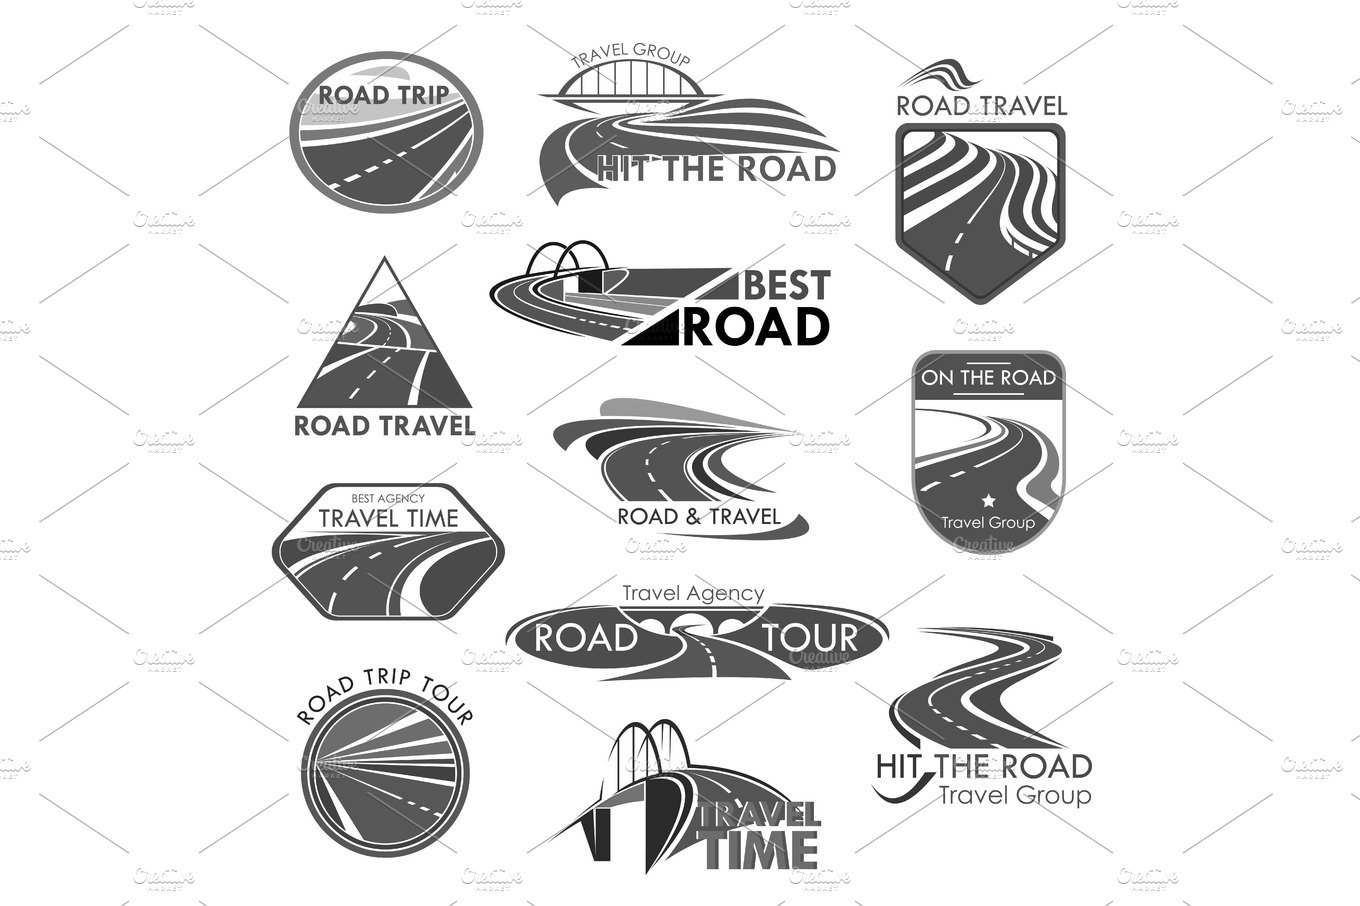 Road travel company agency vector template icons cover image.